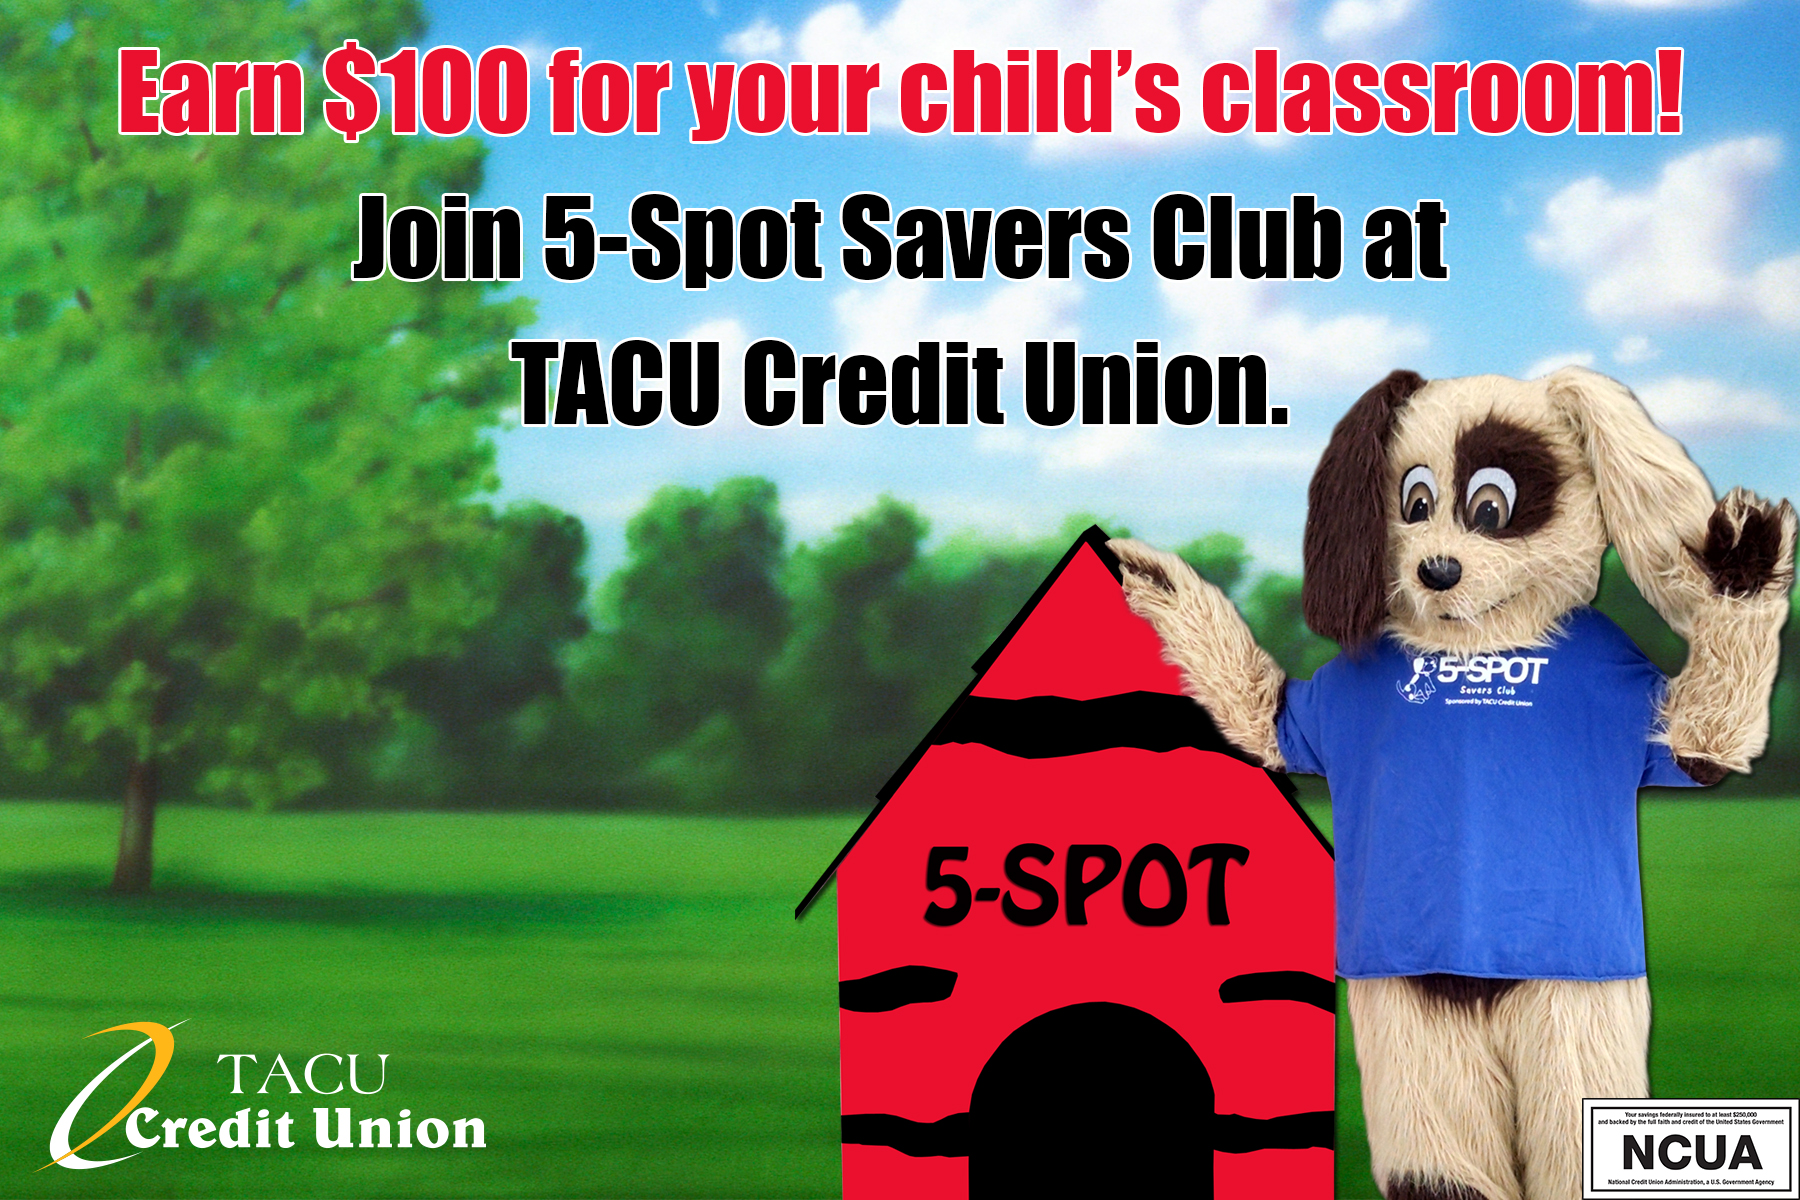 Earn $100 for your child's Classroom! Join 5-Spot Savers Club at TACU Credit Union.